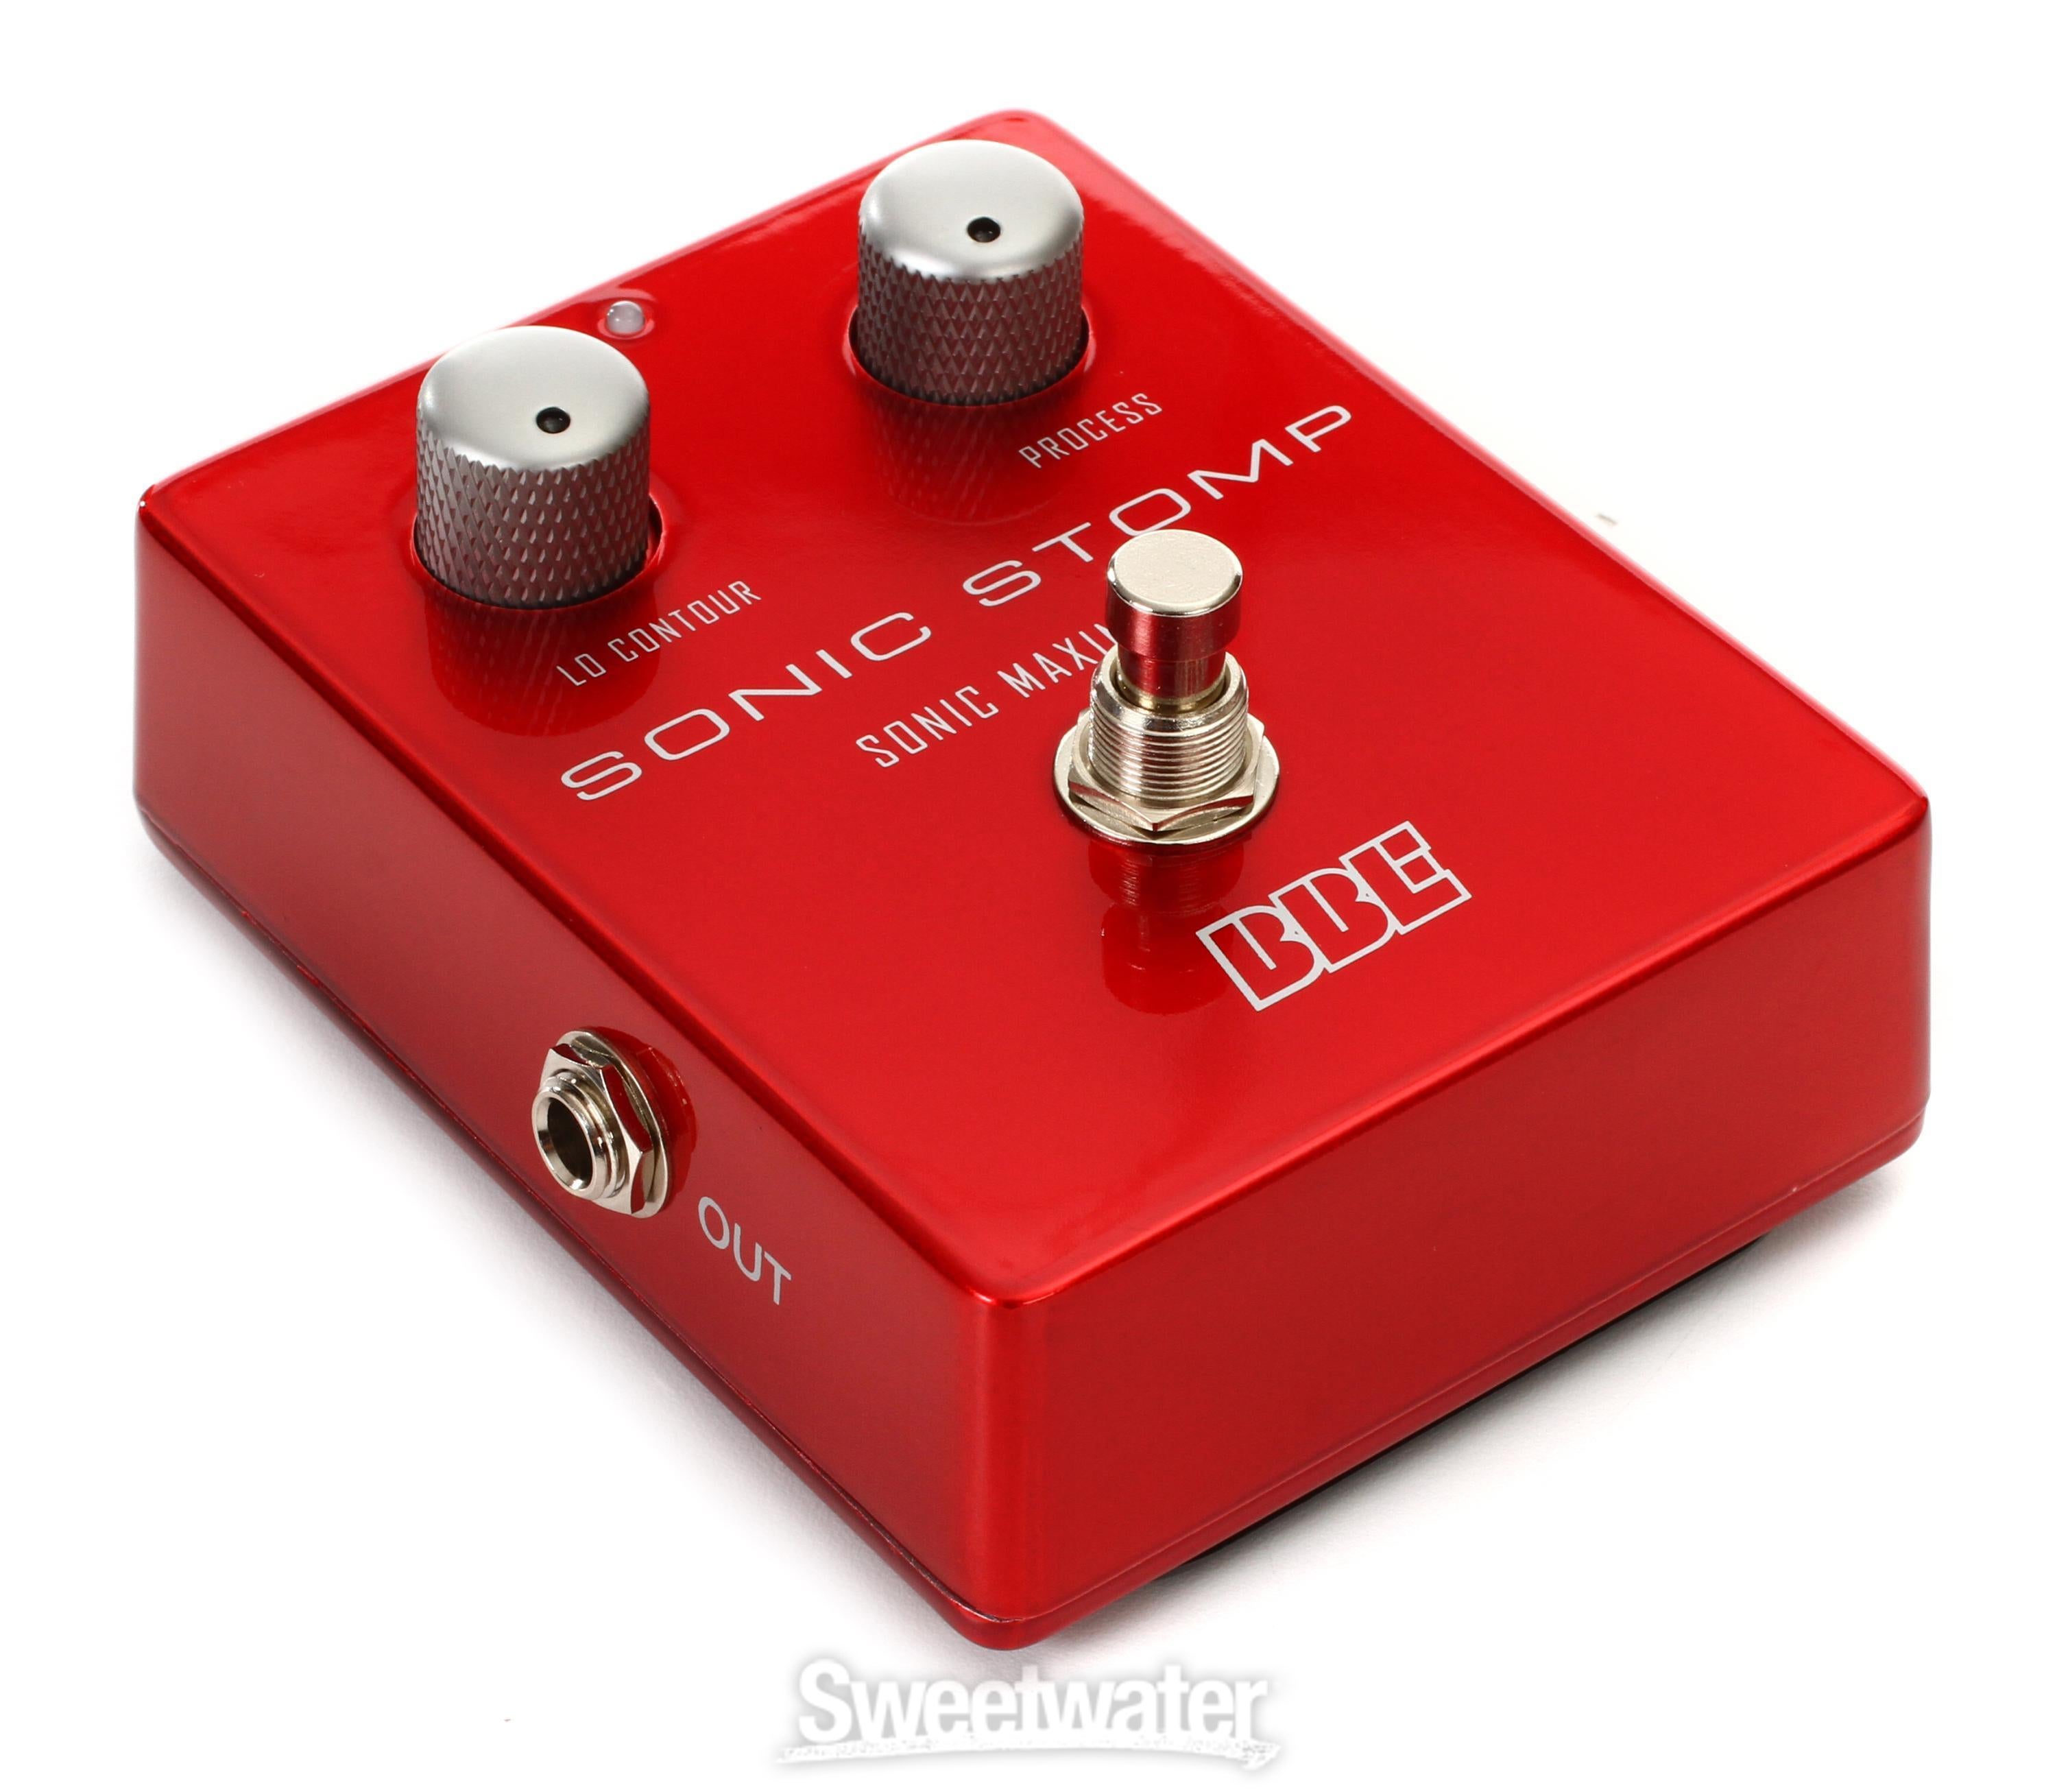 BBE Sonic Stomp Sonic Maximizer Reviews | Sweetwater